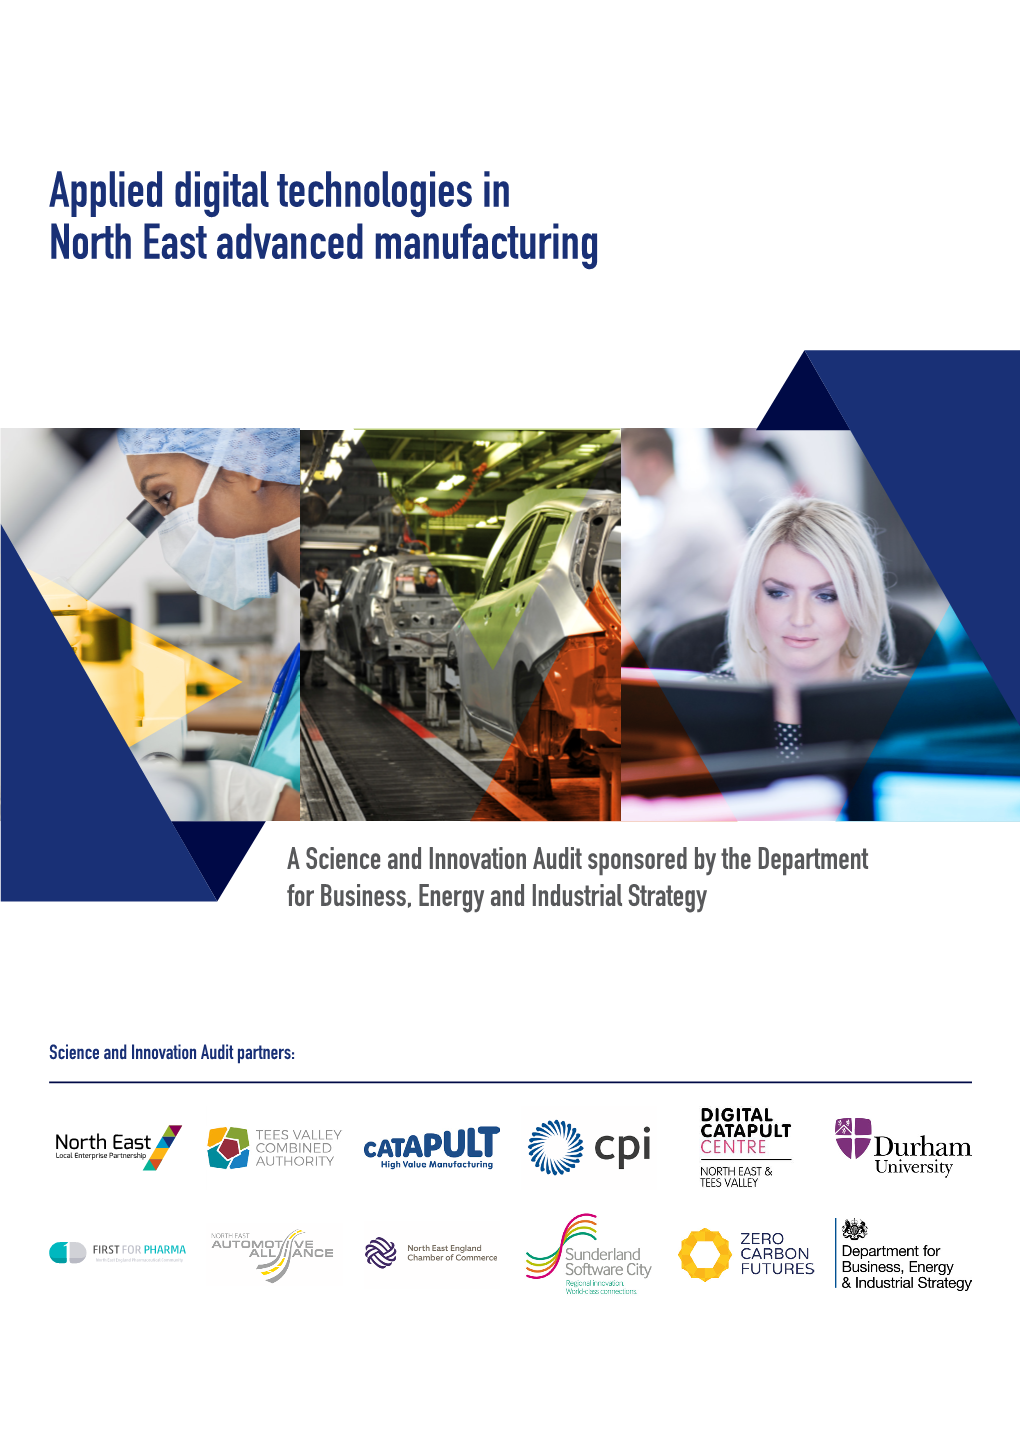 Applied Digital Technologies in North East Advanced Manufacturing